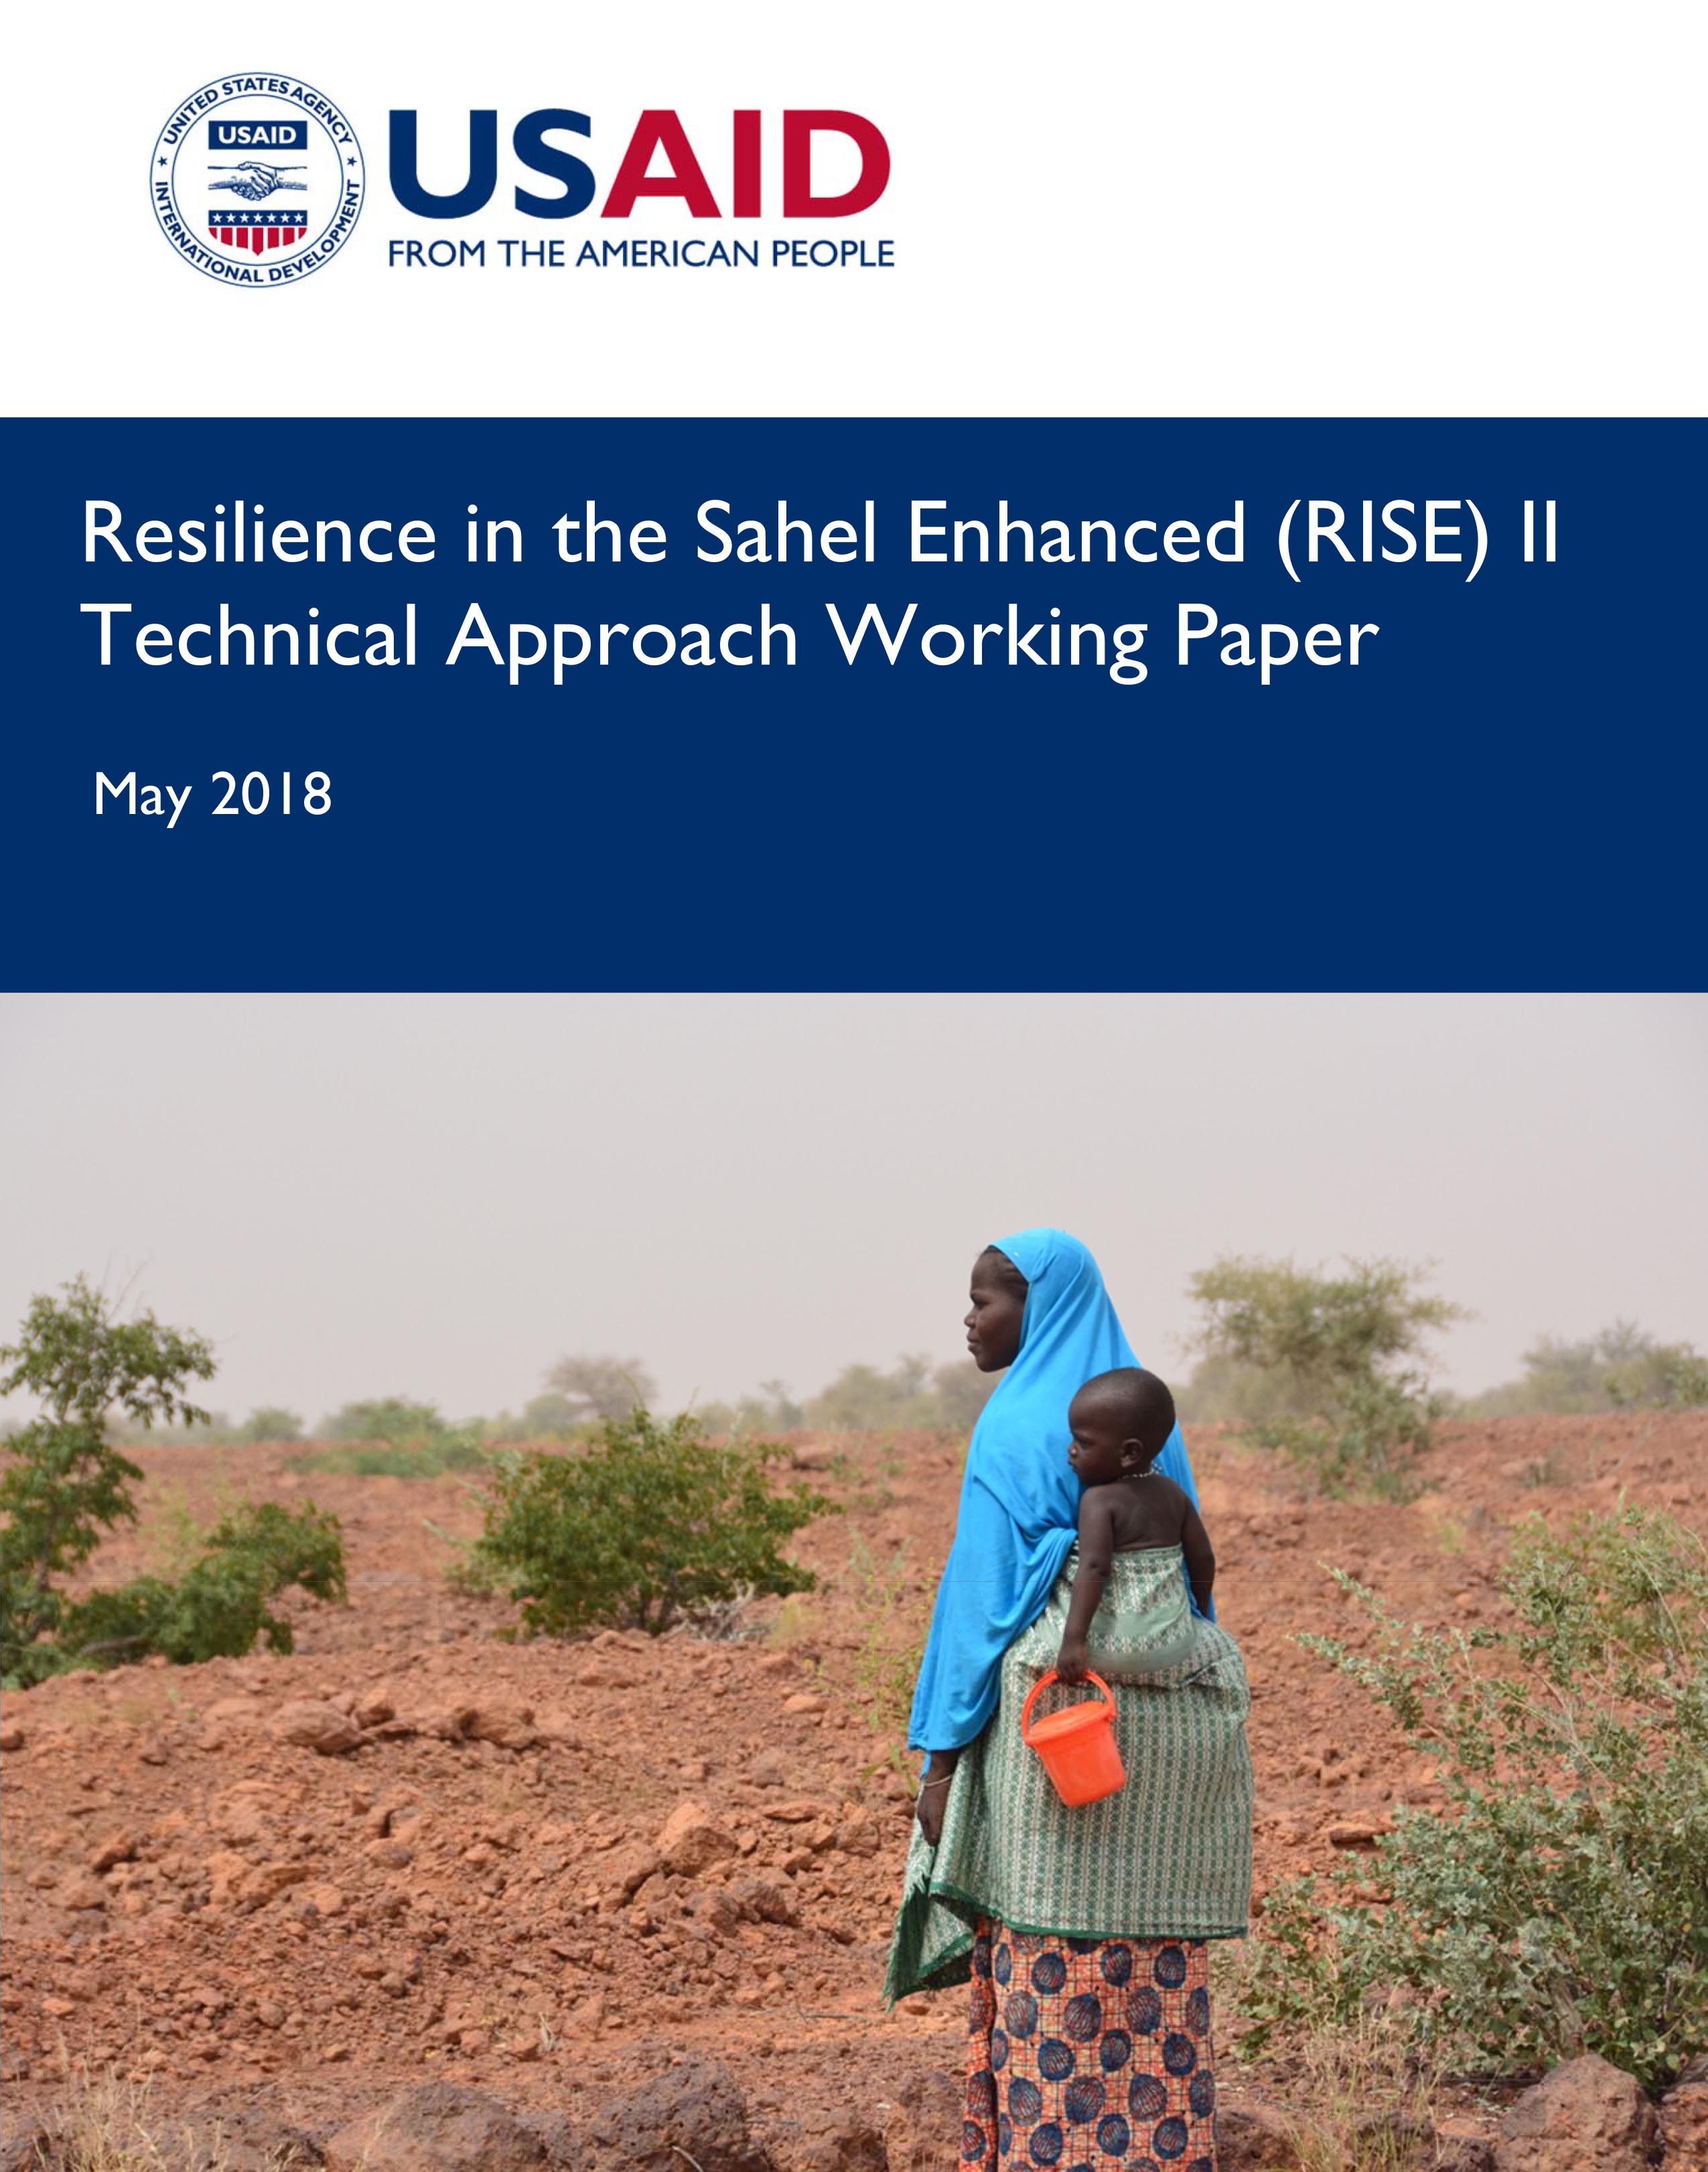 RISE II Technical Approach Working Paper May 2018